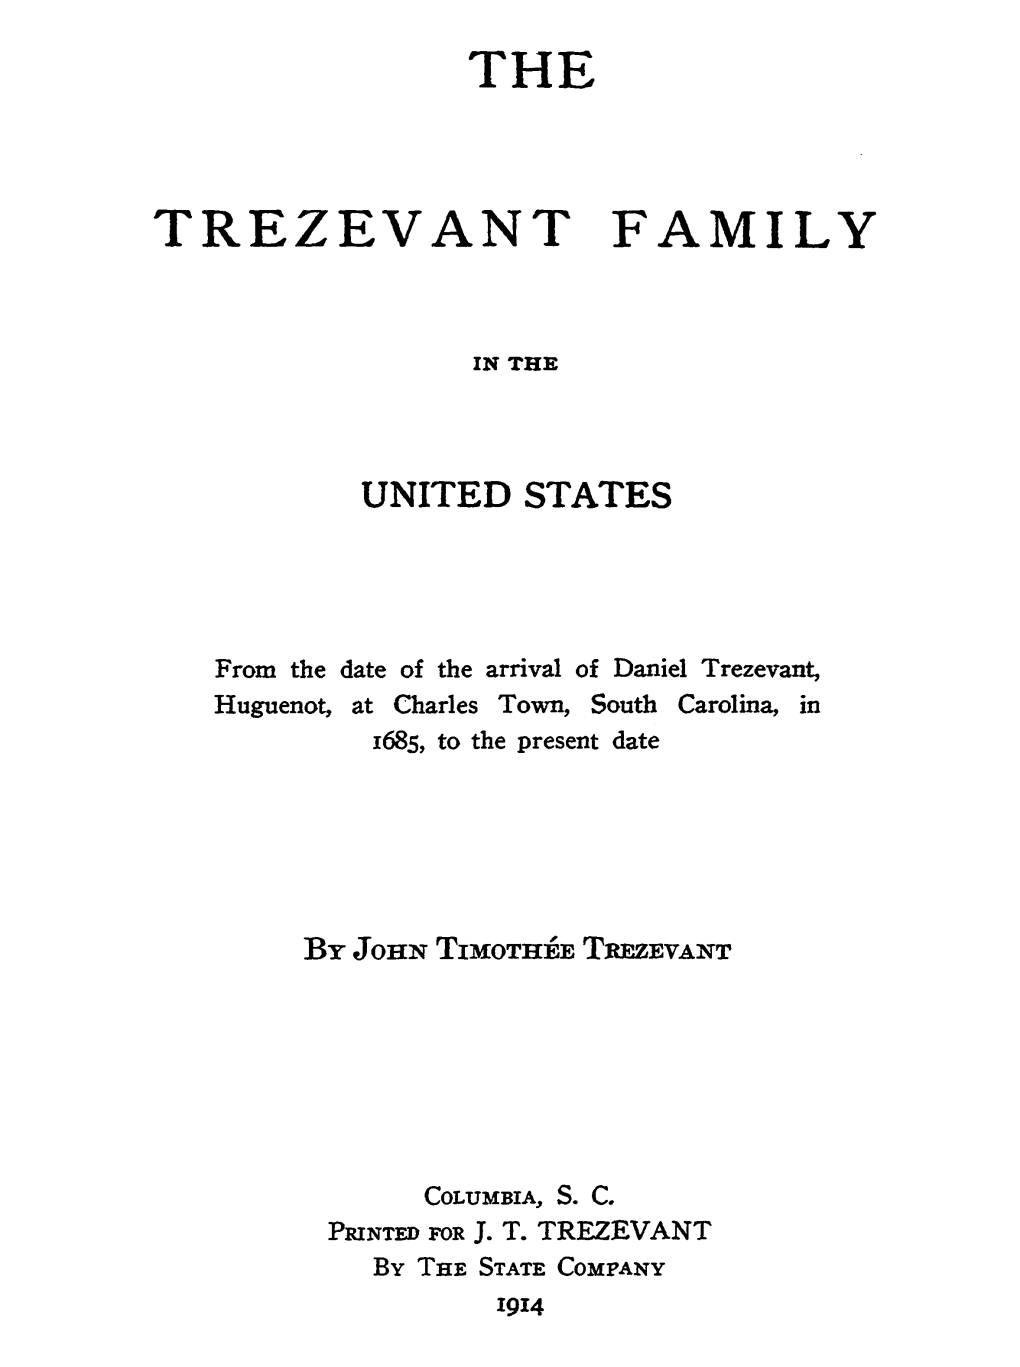 The Trezevant Family in America Has Been to Me a Labor of Love, and an Agreeable Employ­ Ment for Idle Hours During the Past Eighteen Years